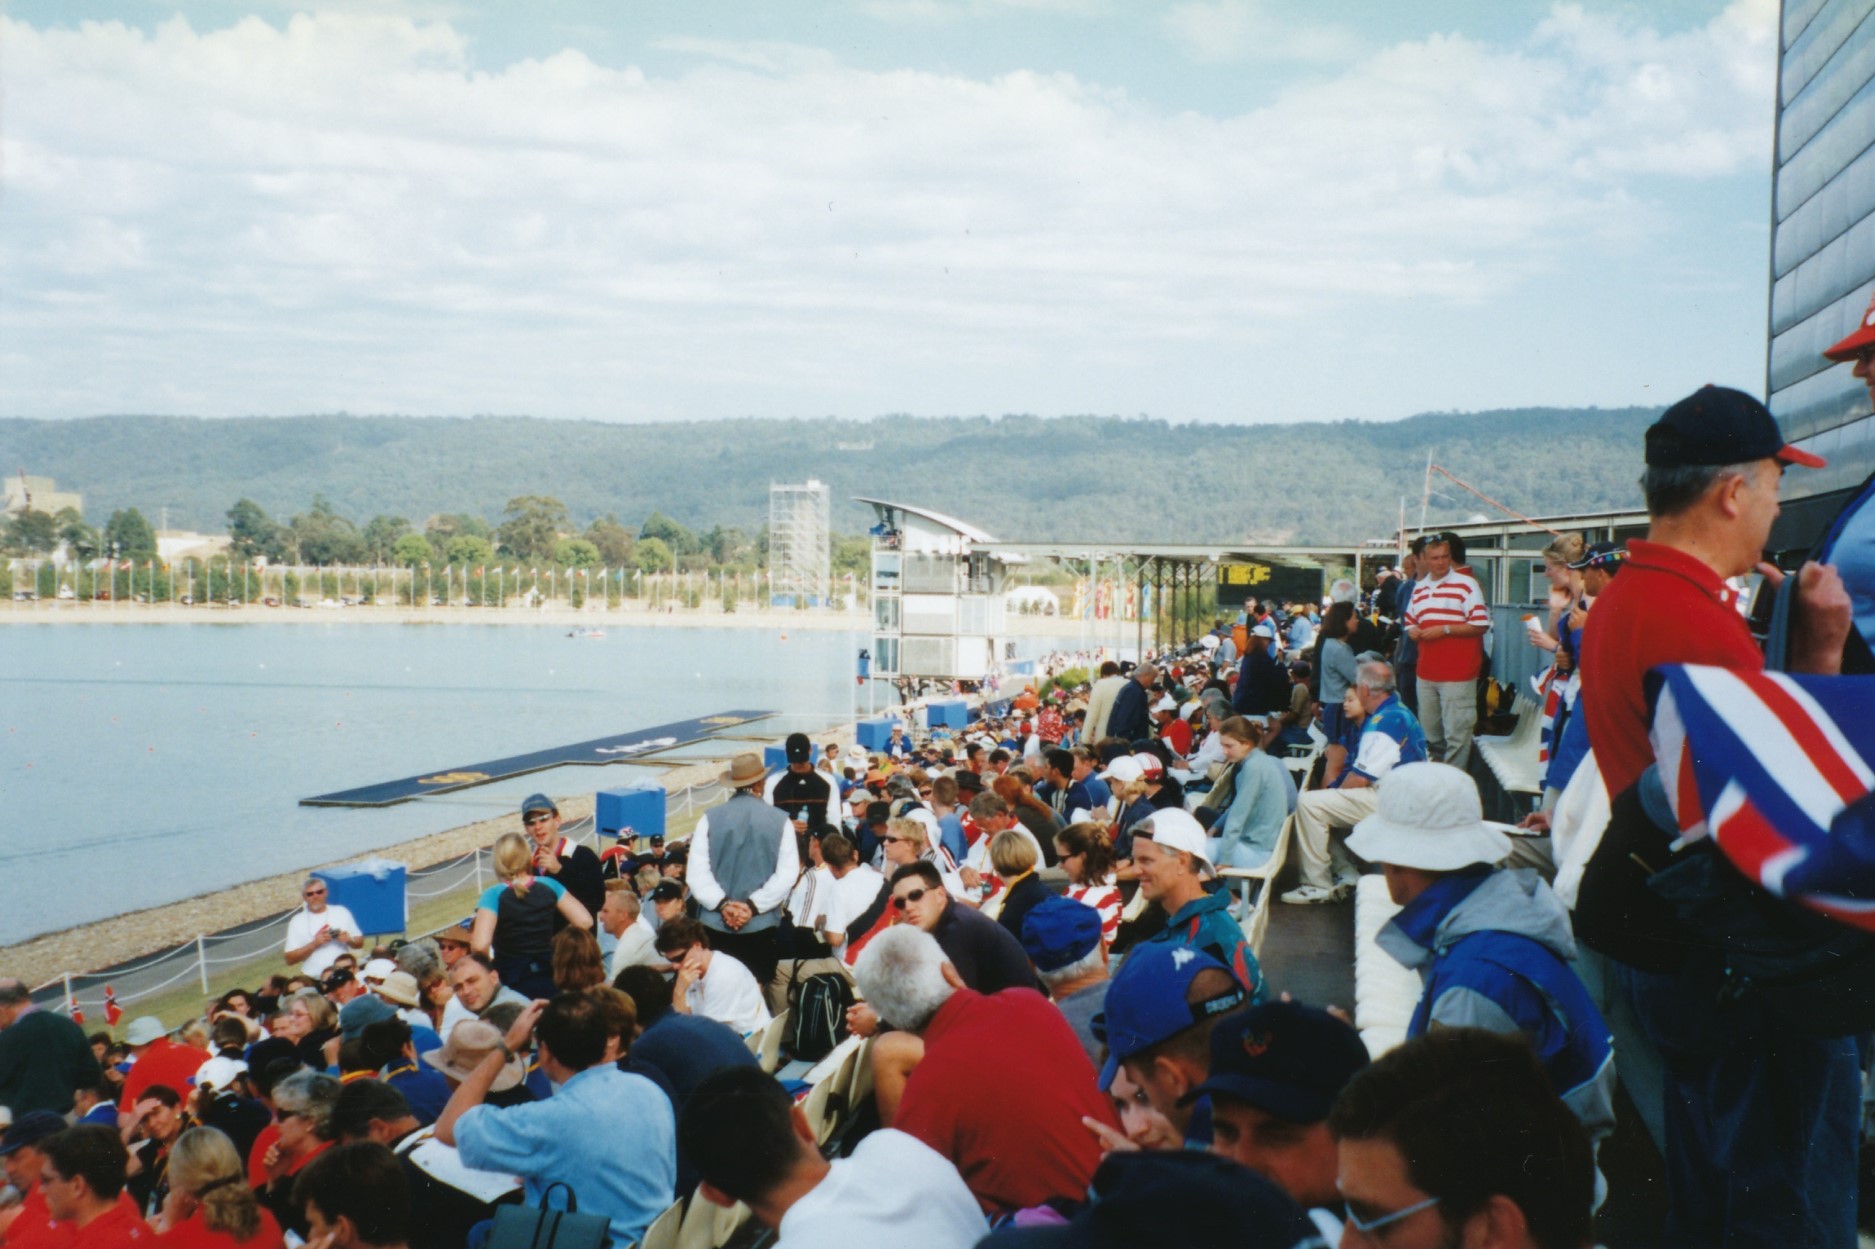 large crowd watches rowing on lake